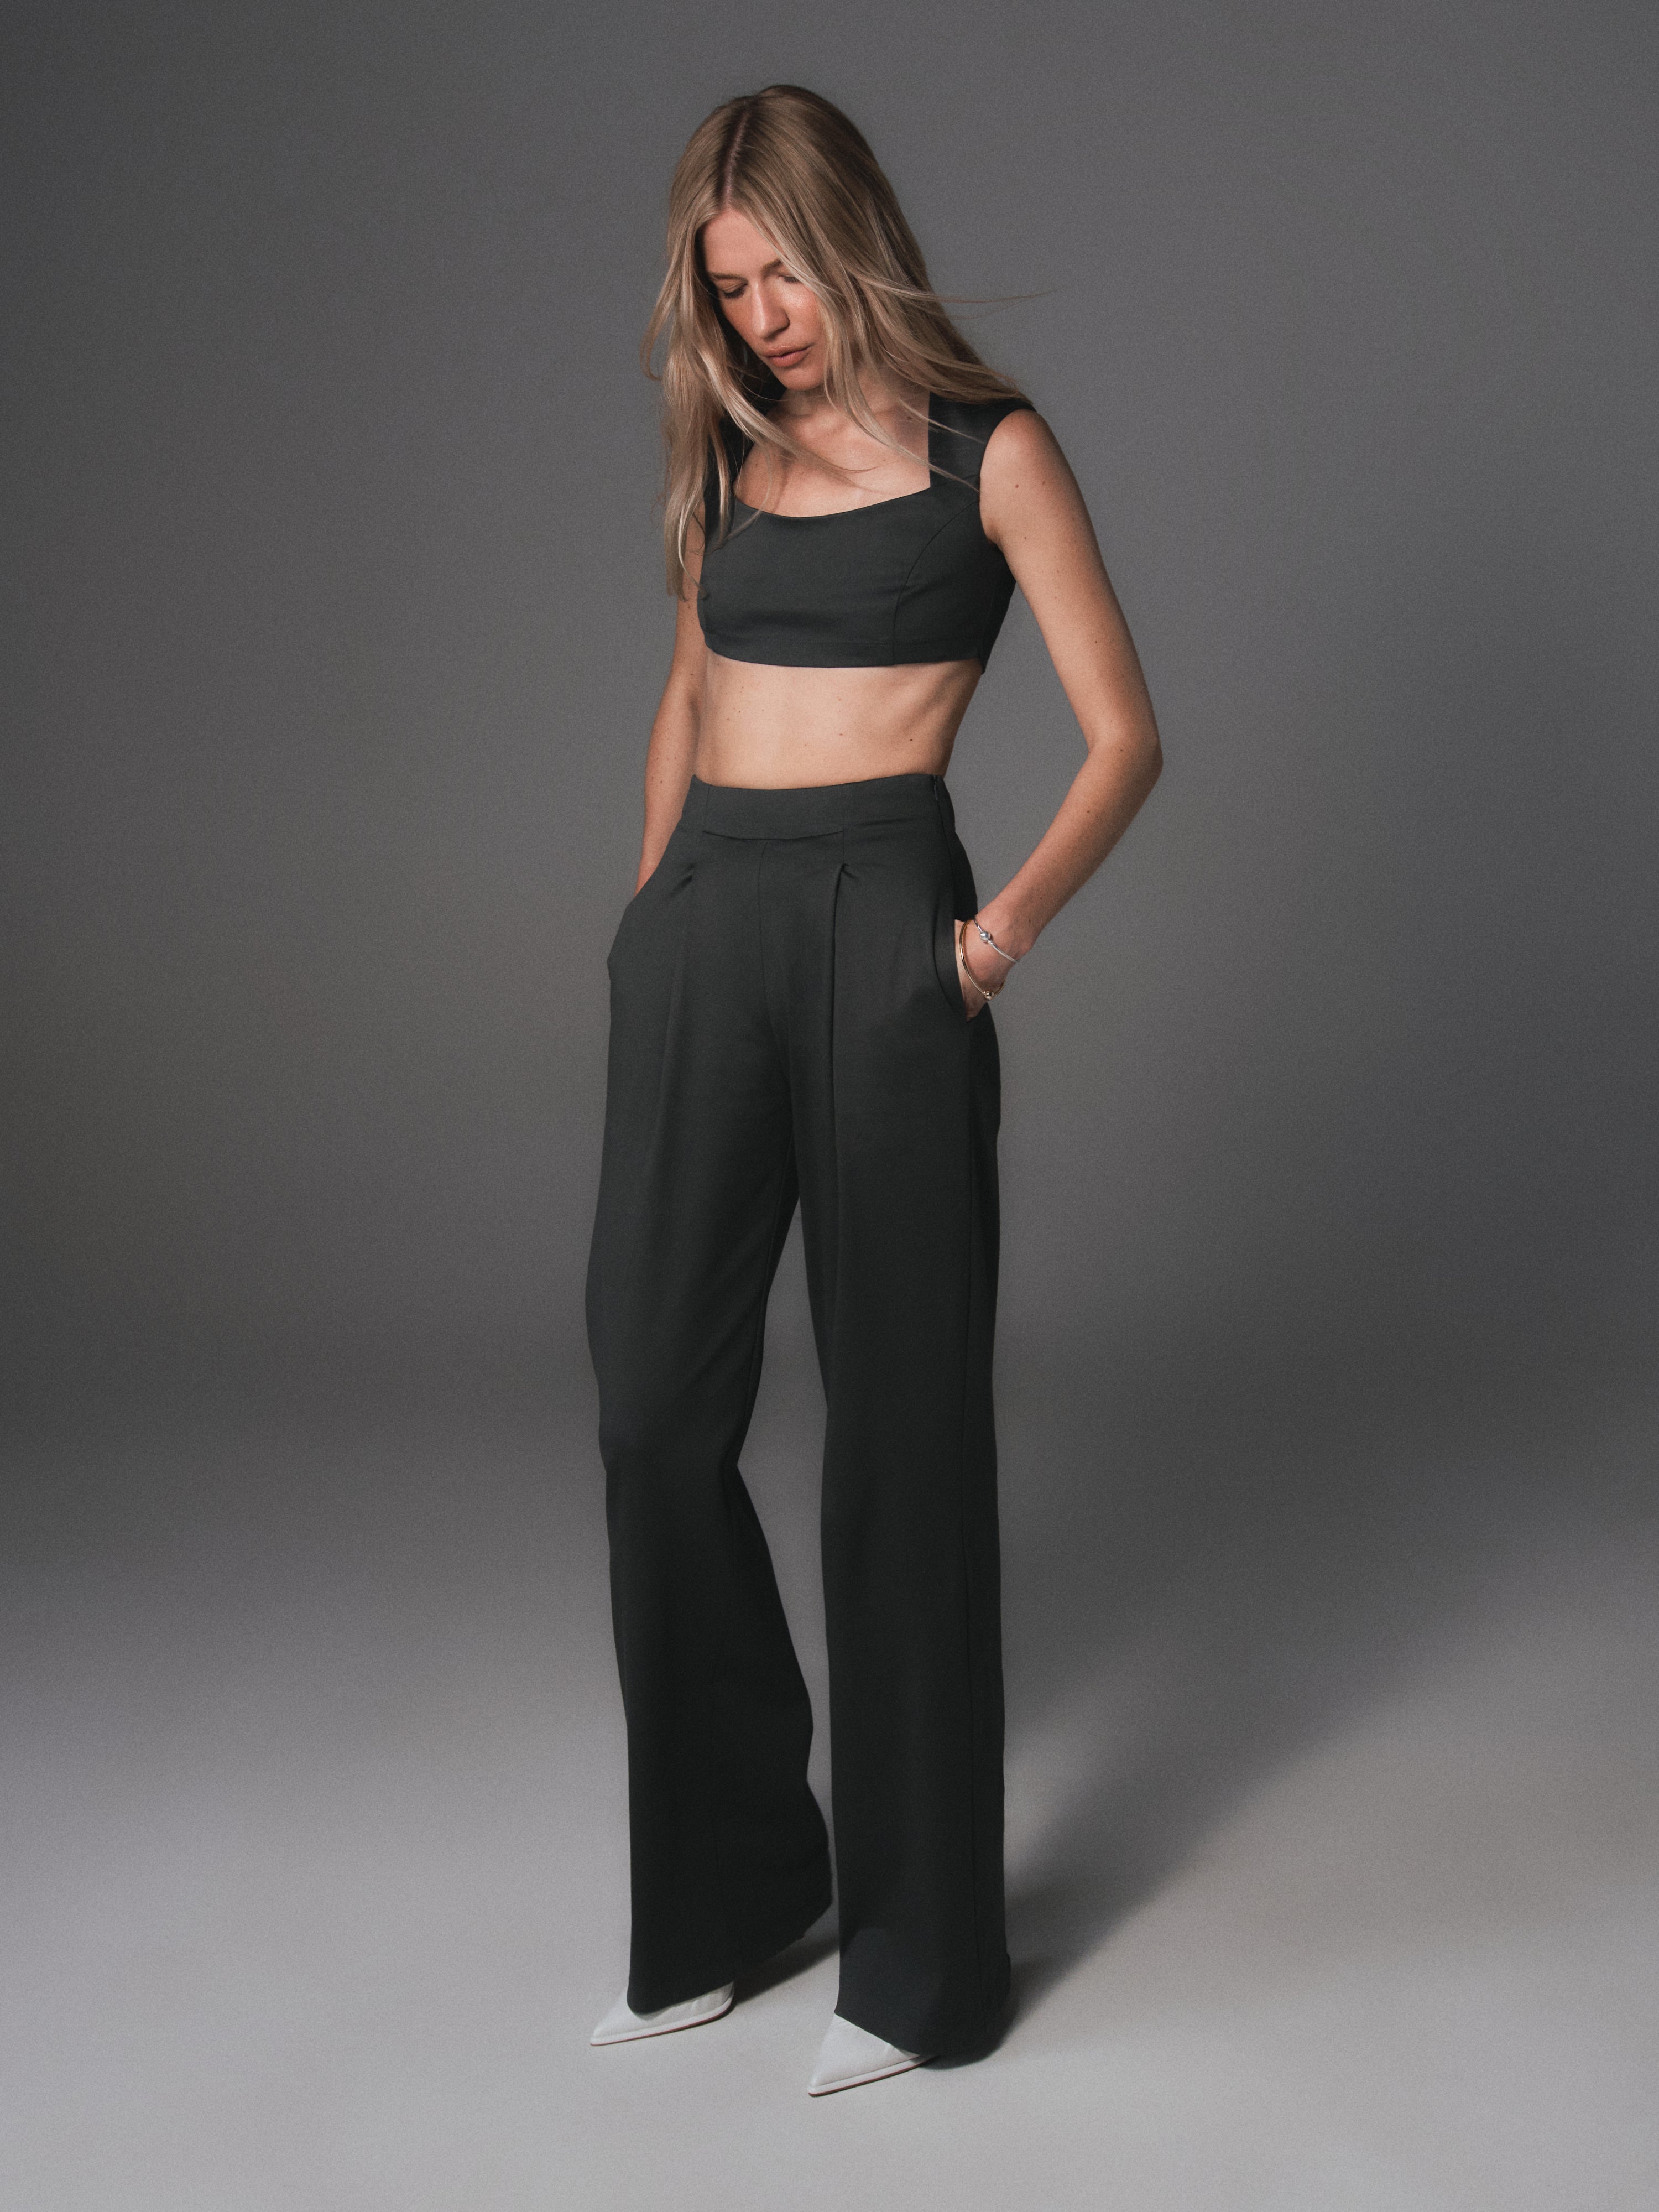 A model posing in a set of a crop top and high waisted pants created from organic 100% cotton in color dark grey 